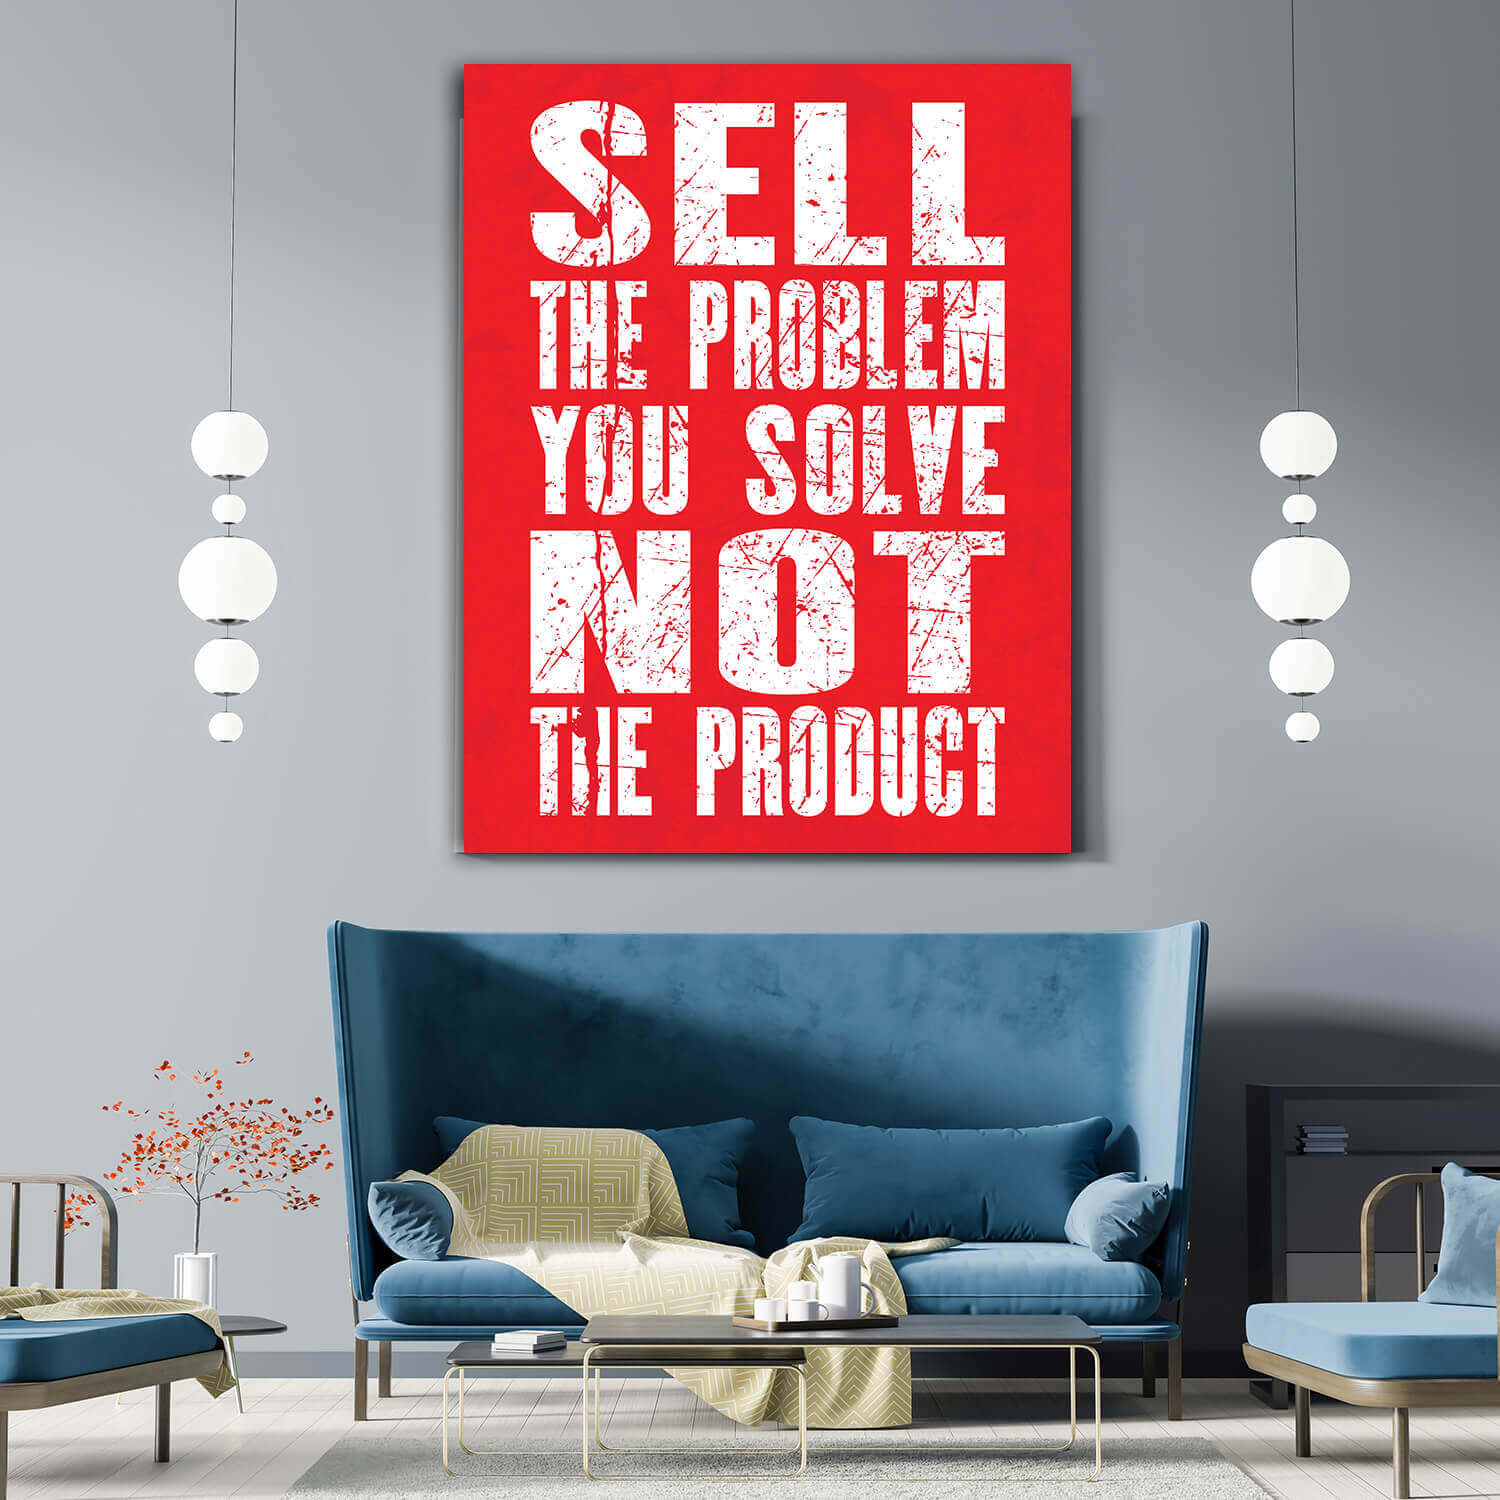 W1_0000_M&P_0002_ML_0021_32764268_Inspiring Quote SELL THE PROBLEM YOU SOLVE NOT THE PRODUCT AOA10803